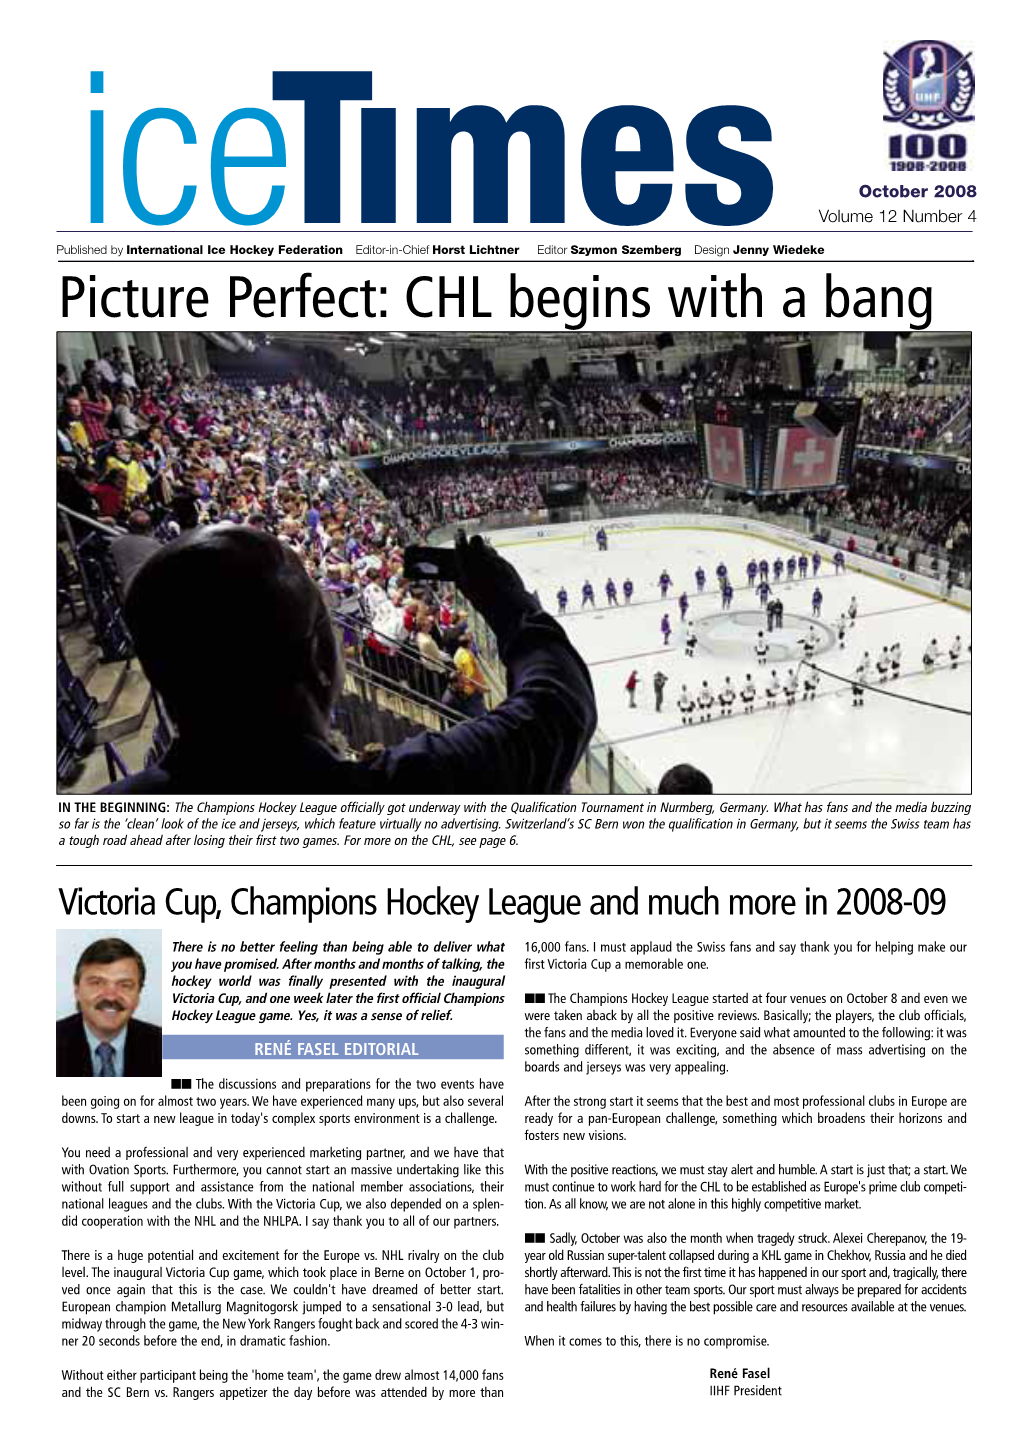 Picture Perfect: CHL Begins with a Bang